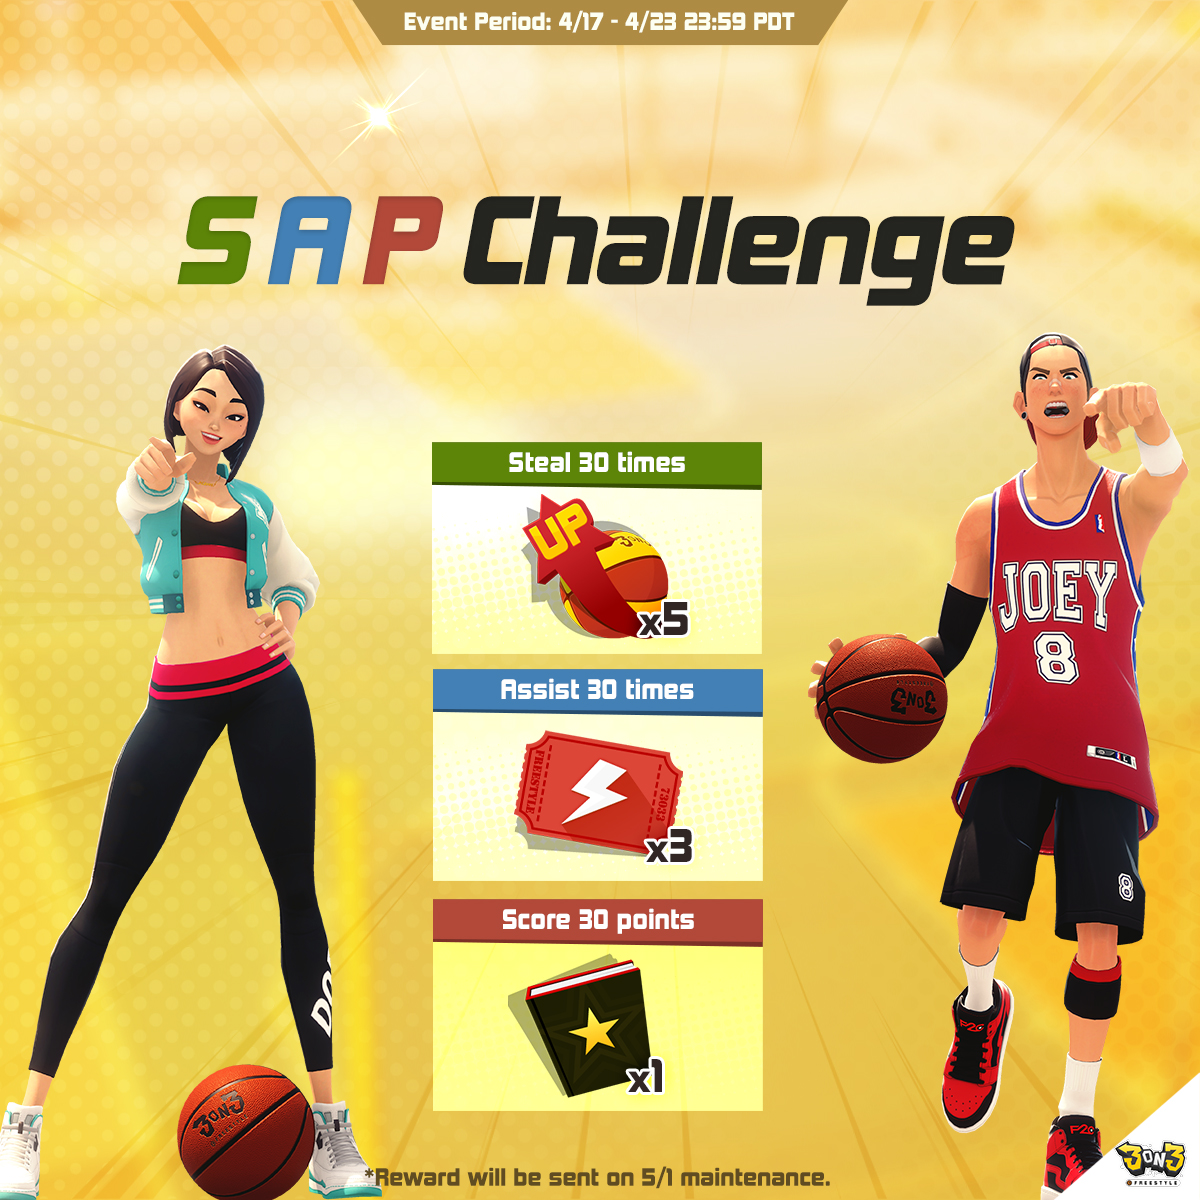 Ready to dominate the court? It's time to rise to the SAP CHALLENGE! Rack up steals, assists, and scores to claim those extra rewards! Don't miss out – event ends 04/23! 

*Reward will be sent on 5/1 maintenance.

#videogame #StreetBasketball #3on3freestyle